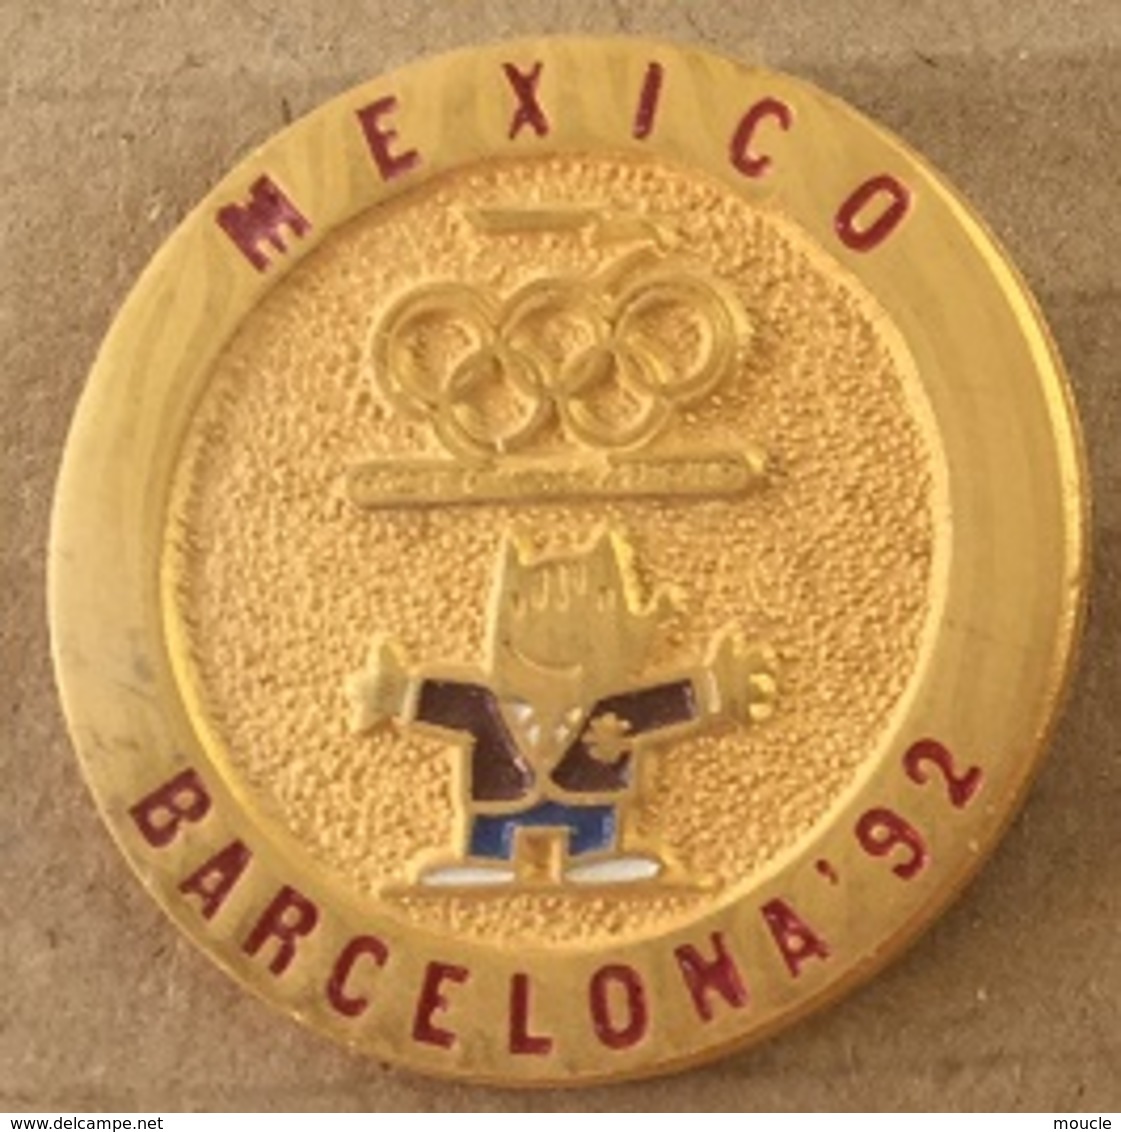 JEUX OLYMPIQUES - BARCELONA'92 - TEAM OF MEXICO - COMITE OLYMPIC - MEXIQUE - ESPAGNE - SPAIN  -    (20) - Olympic Games